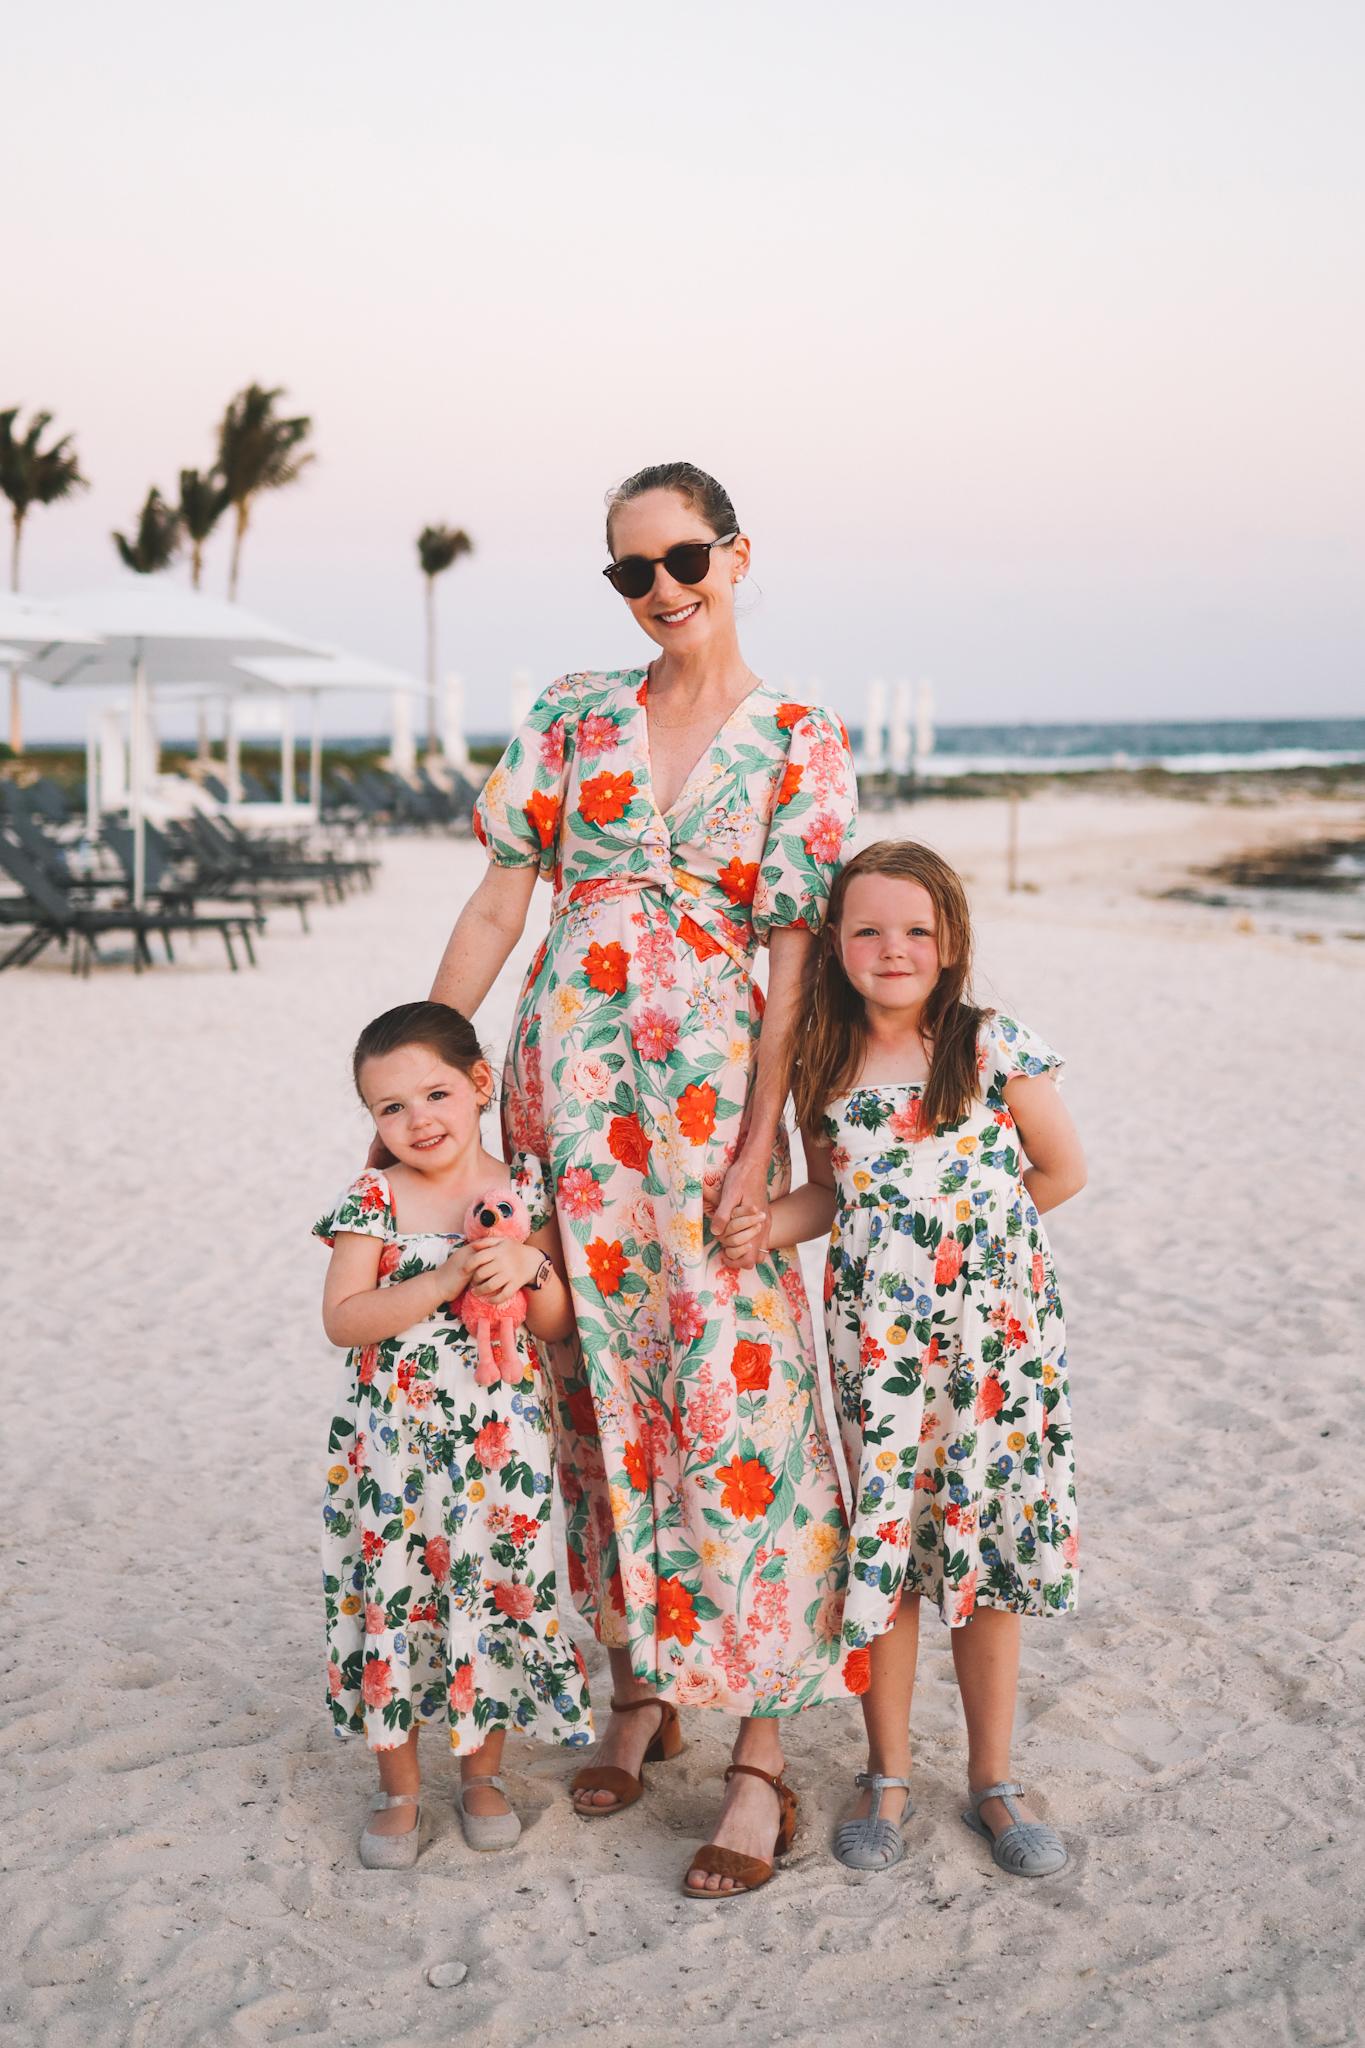 Our Favorite Old Navy Outfits for Tulum